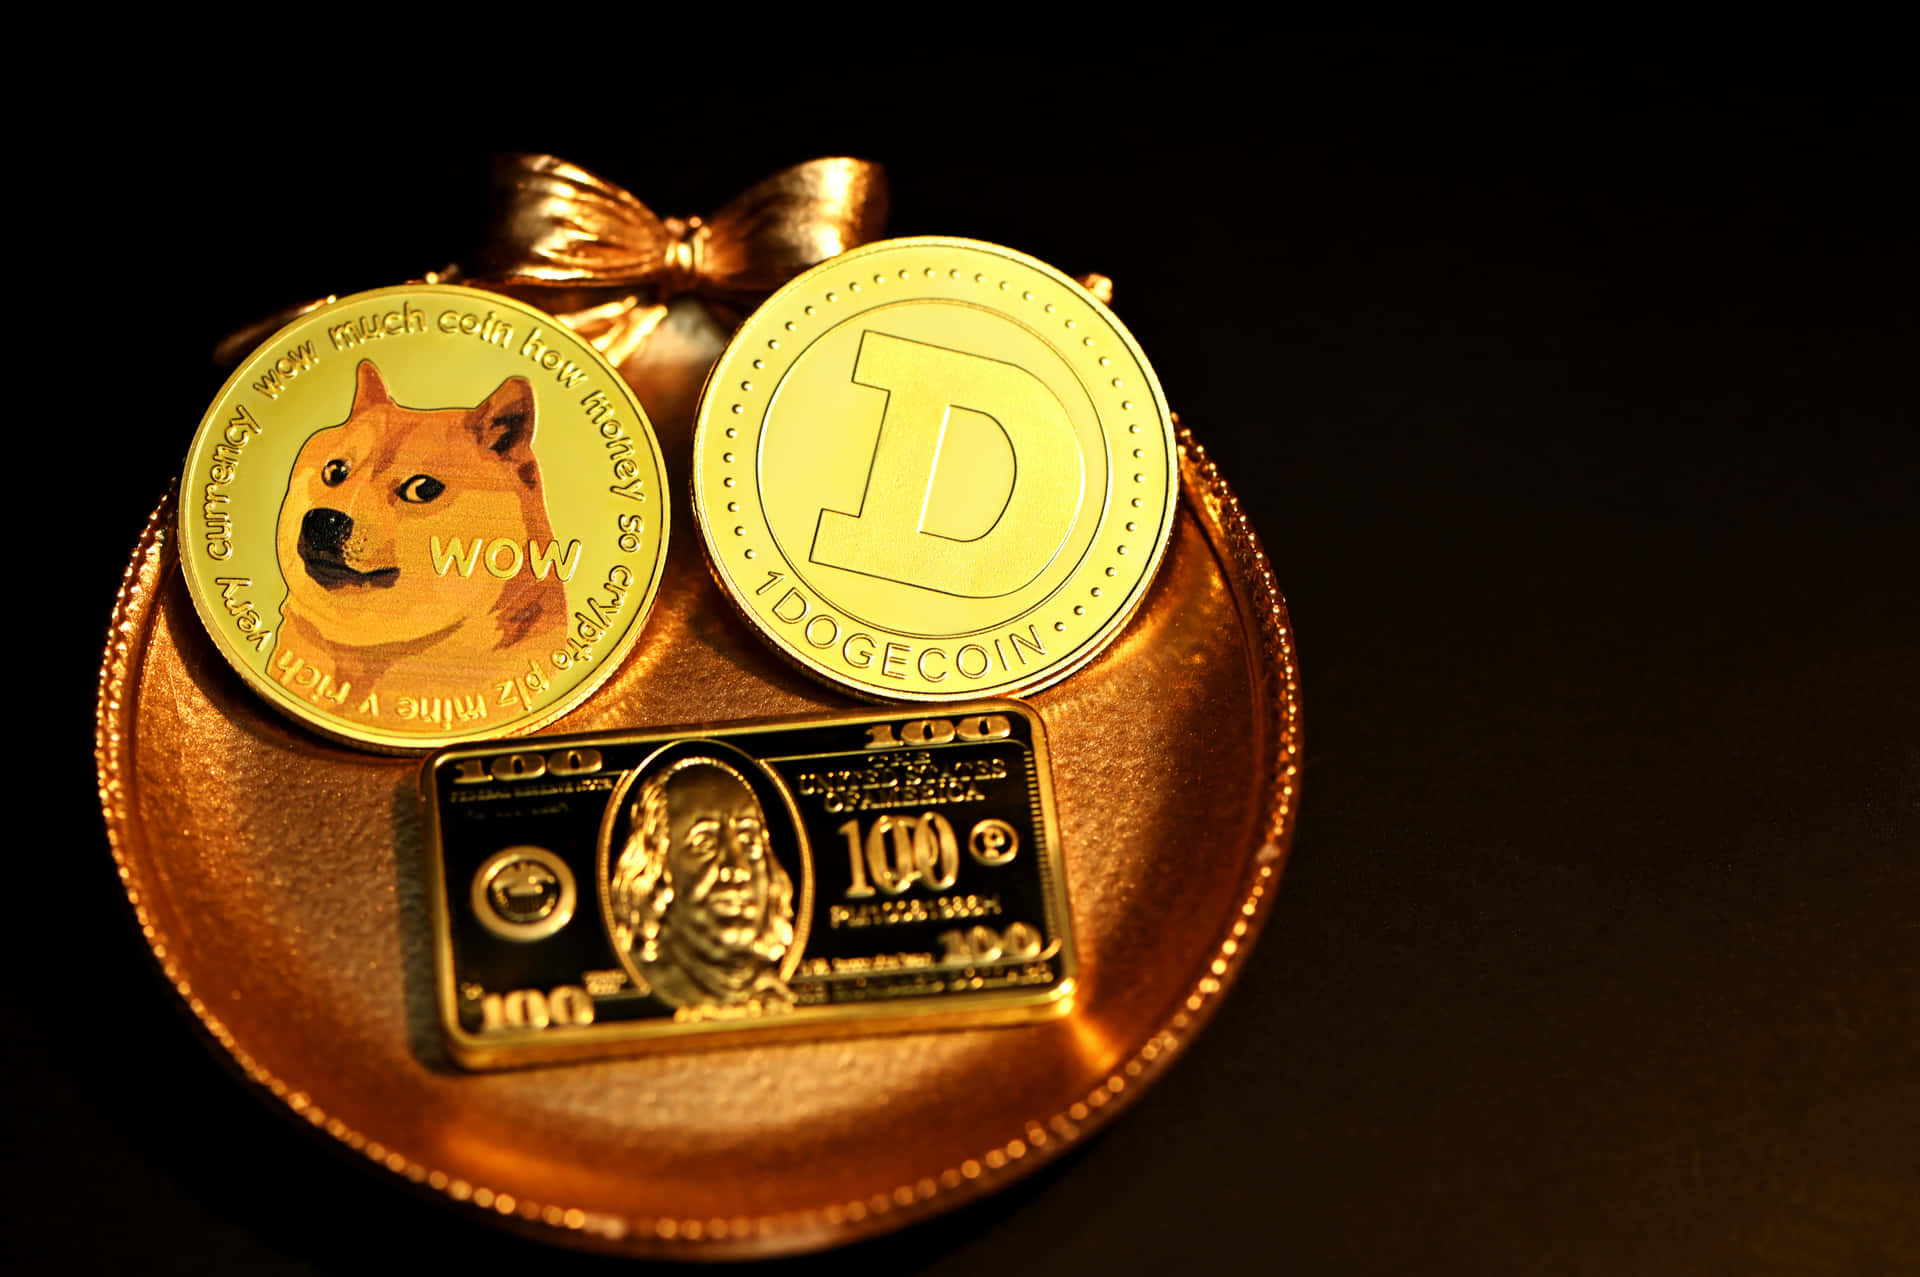 Dogecoin rocketing to the moon with bold text over a galaxy backdrop